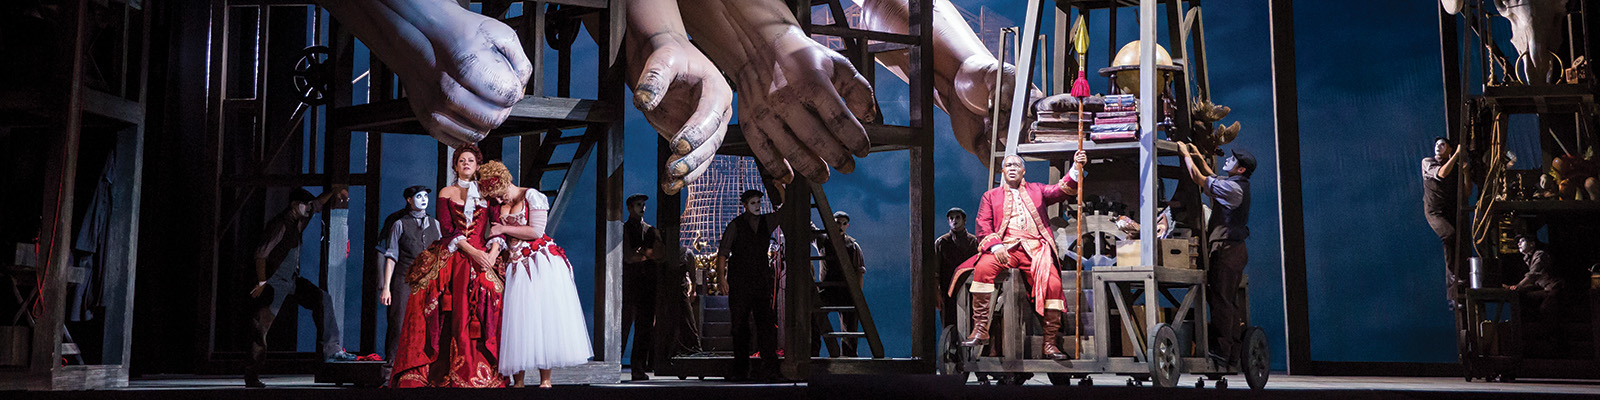 Melbourne Opera: Siegfried in Concert review – Man in Chair